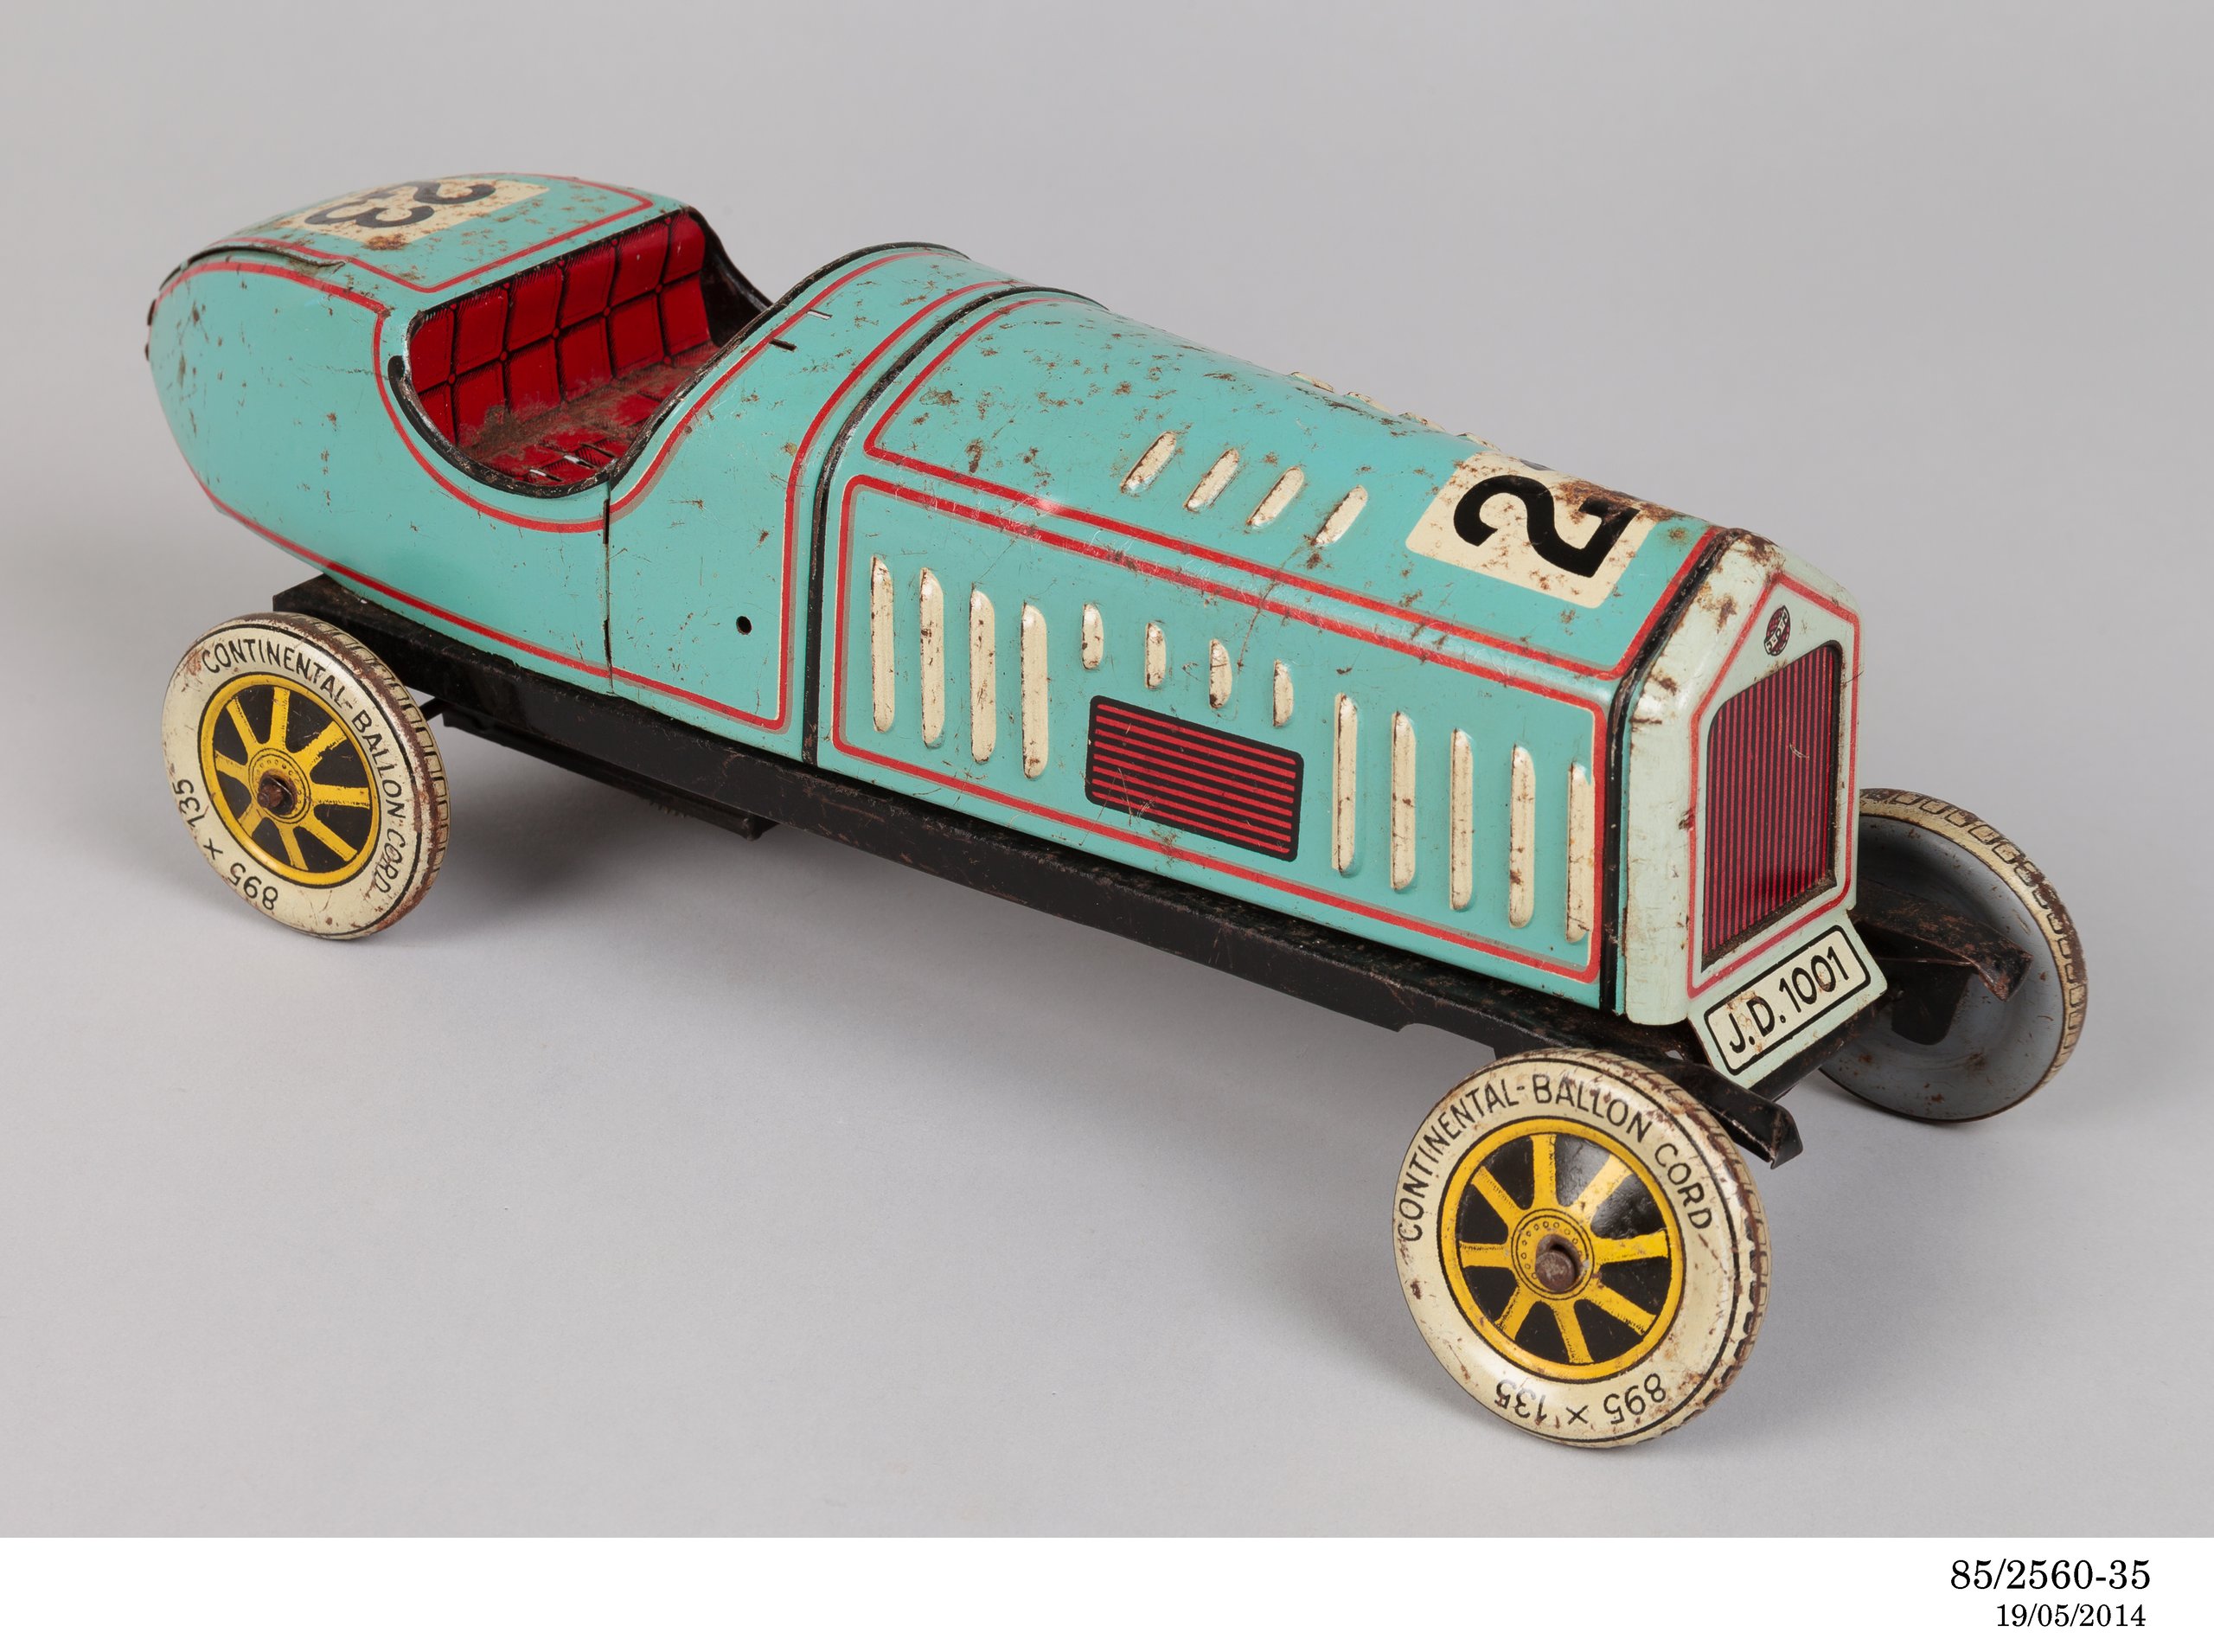 Powerhouse Collection - Toy tin plate car made by Distler, Germany